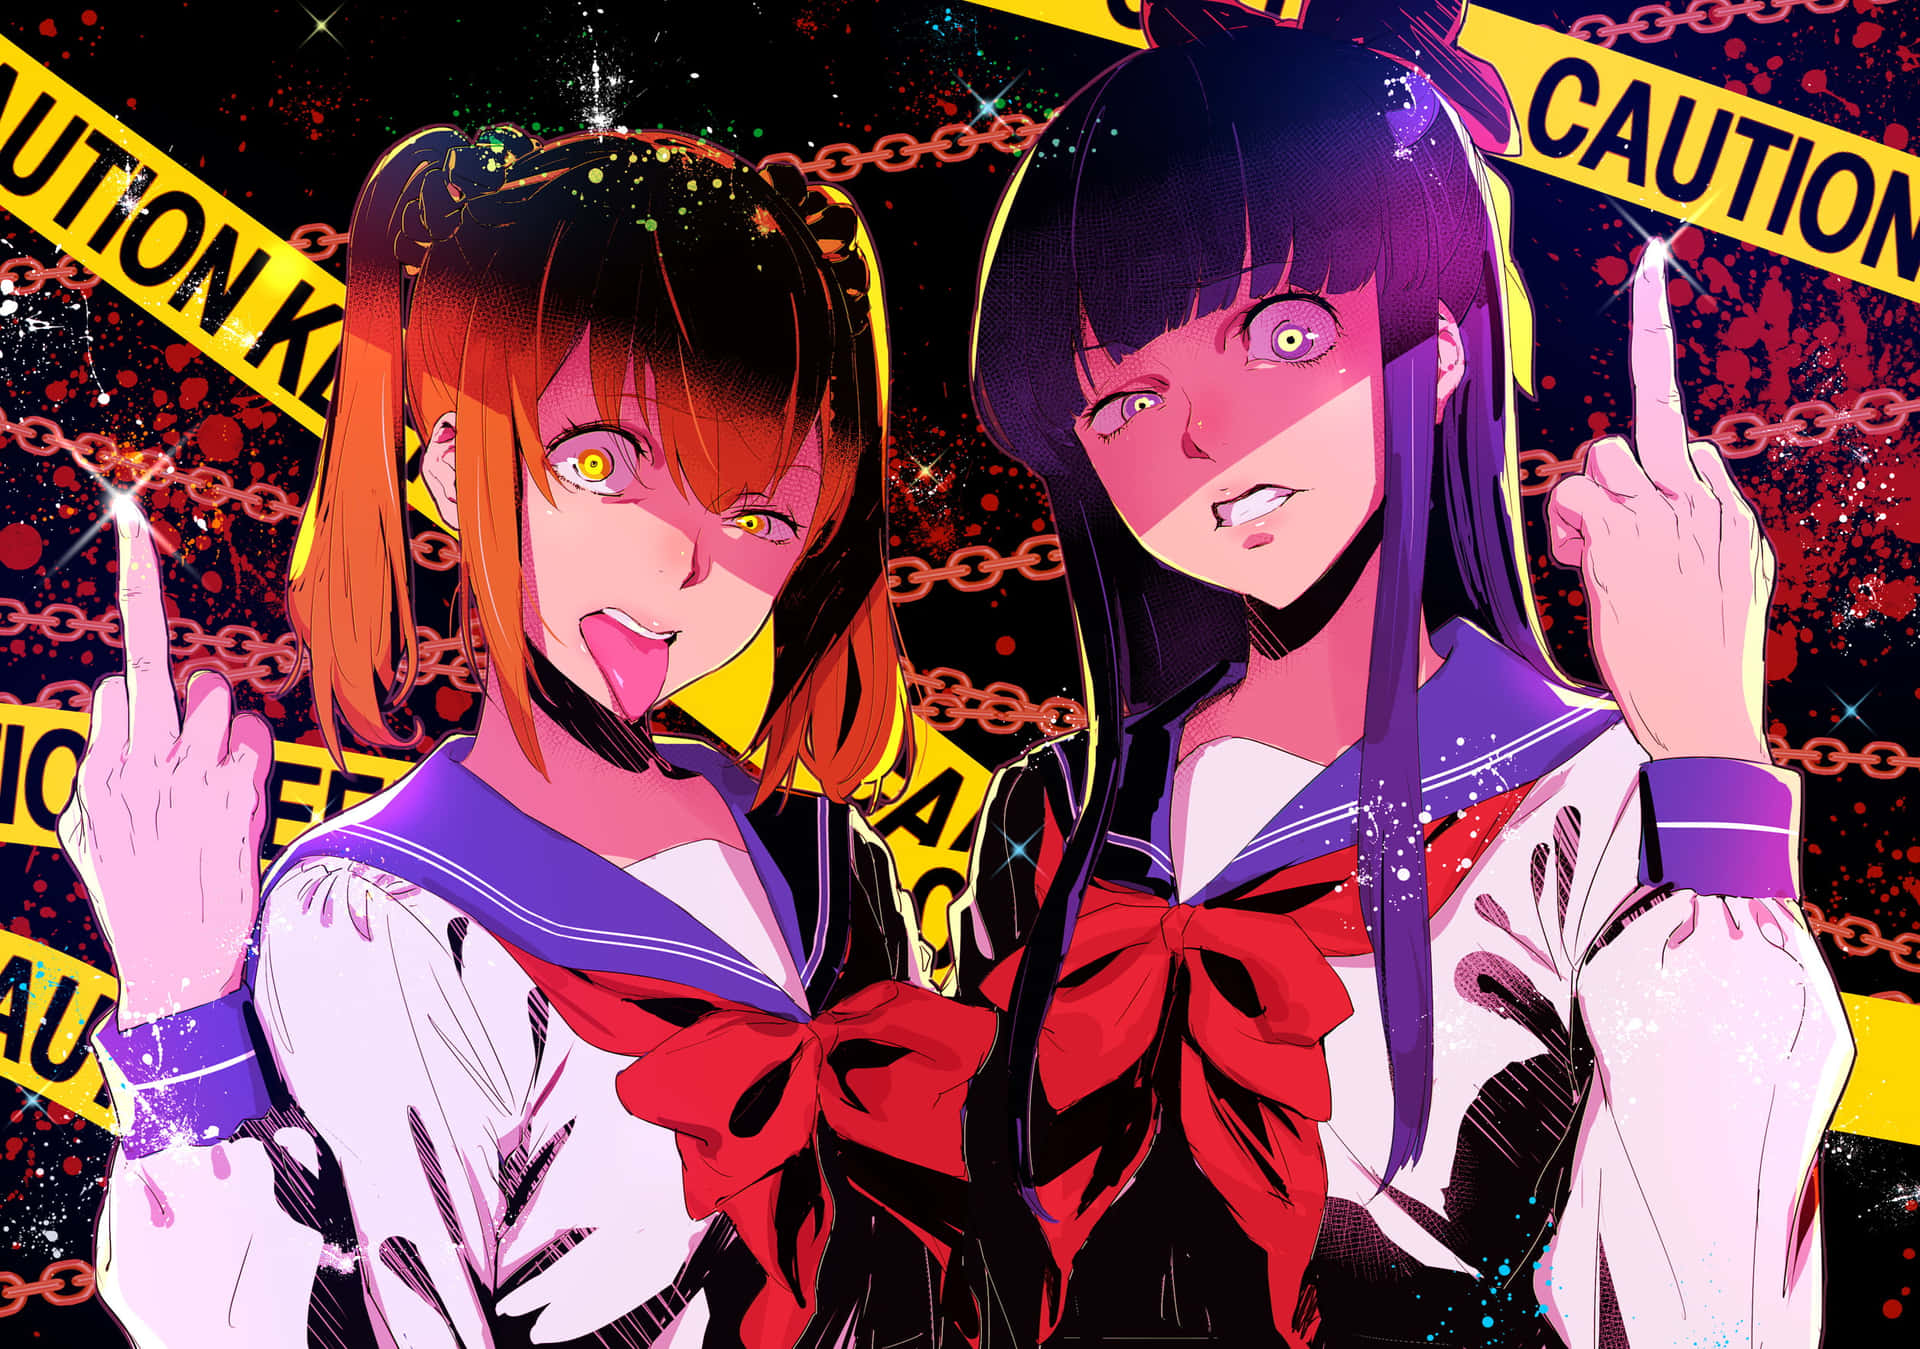 Two Anime Girls Standing In Front Of Caution Tape